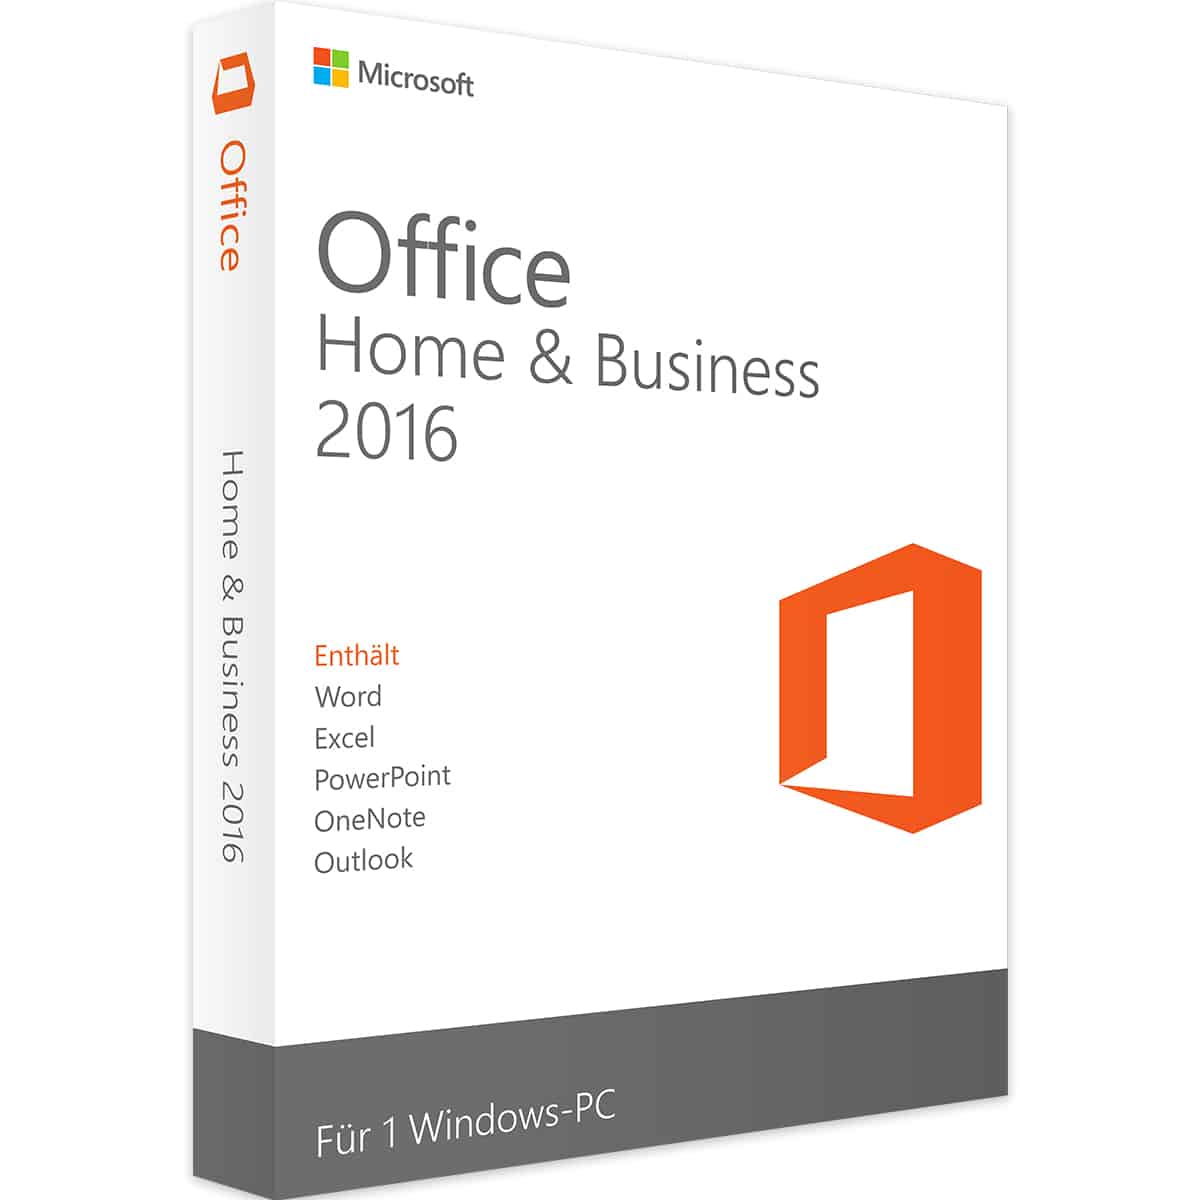 Office 2016 Home and Business Activation Key